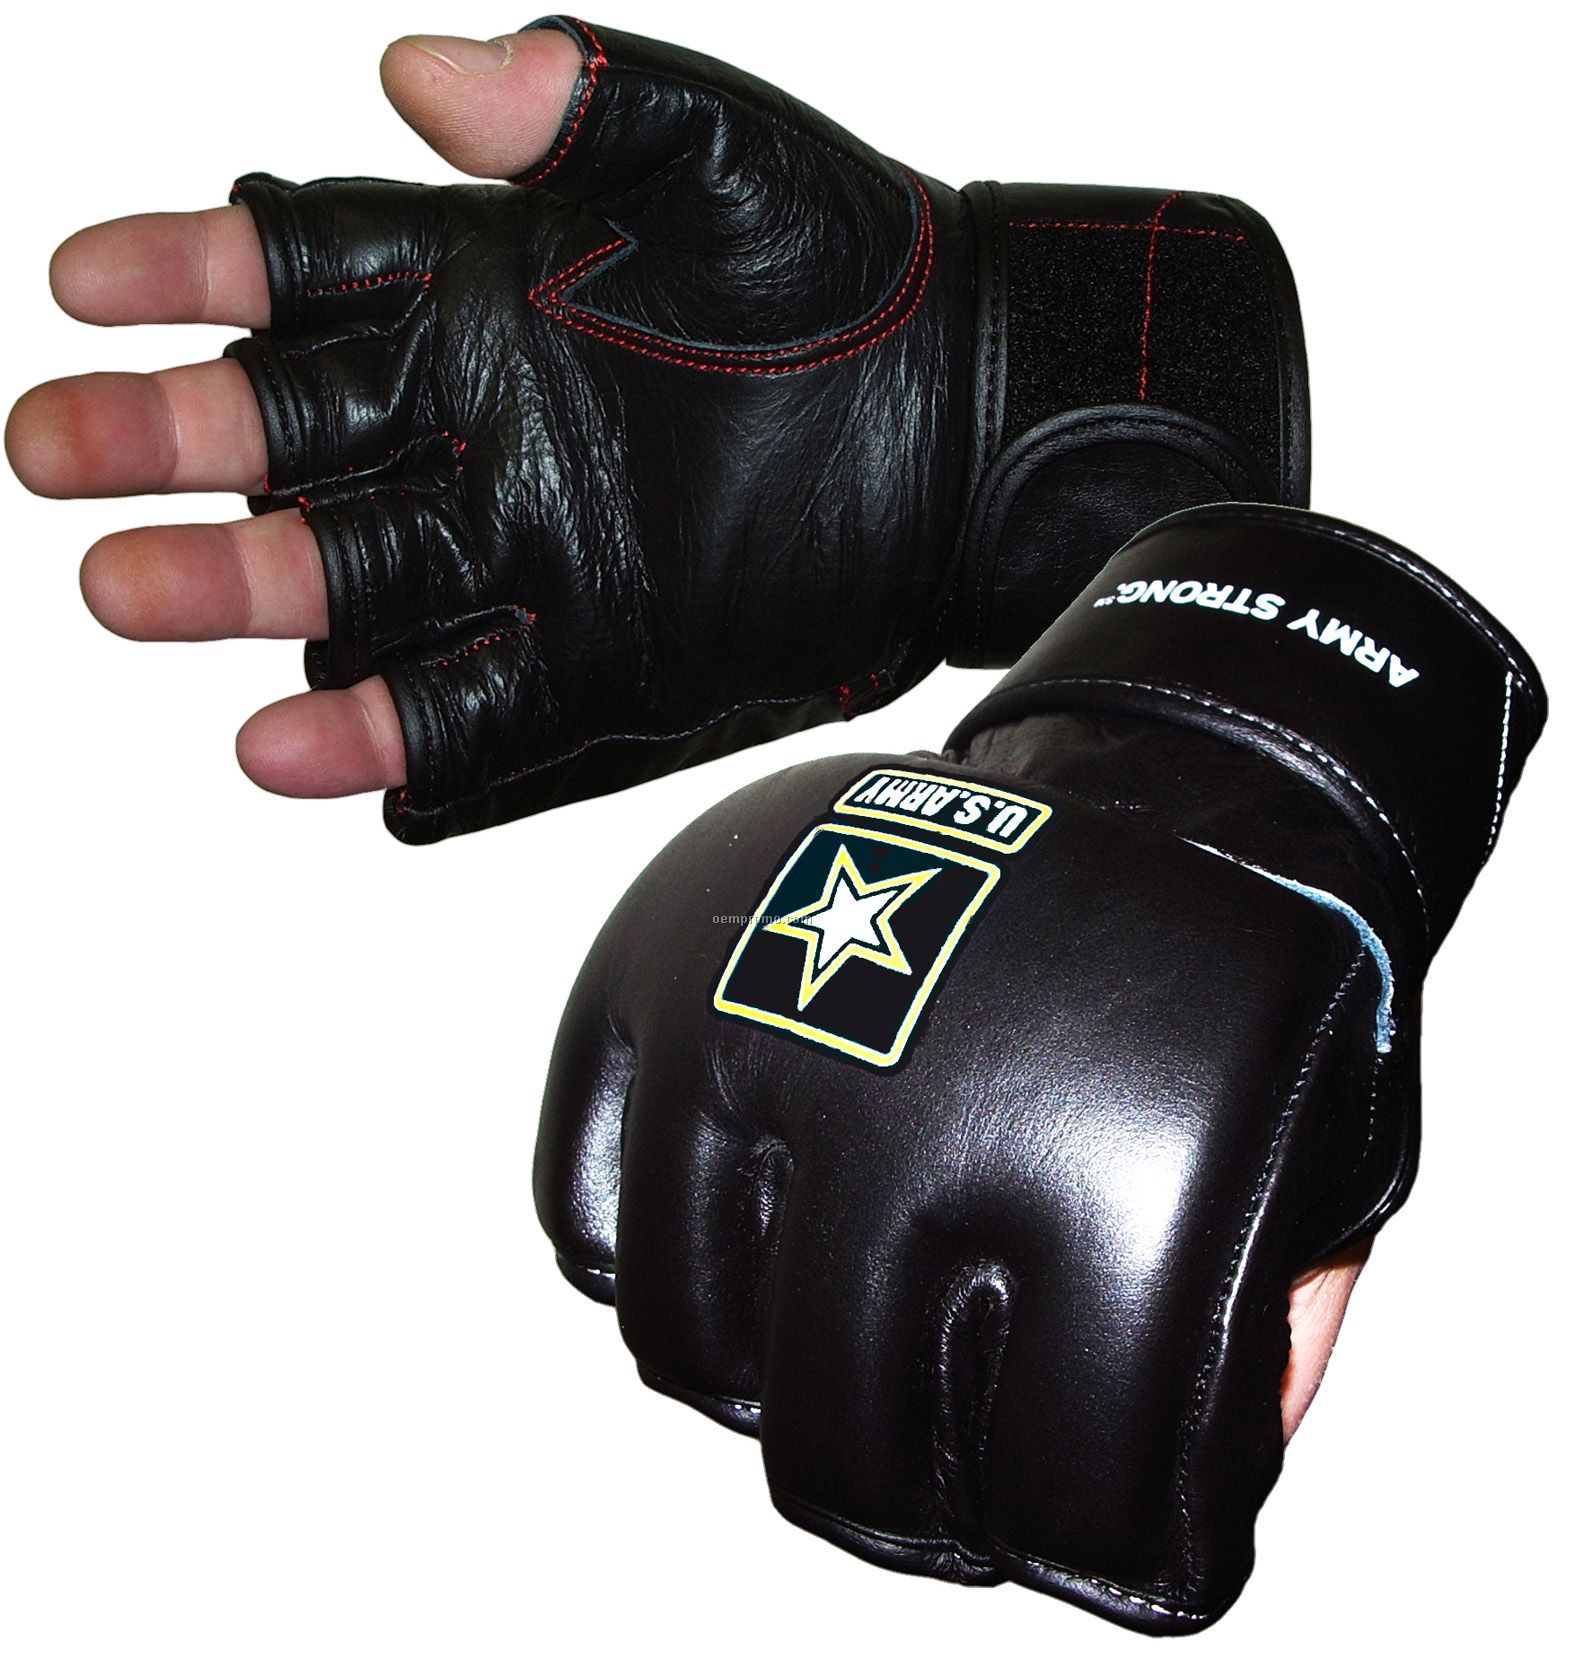 Mma Boxing Gloves, Artificial Leather, Closed Palm Version